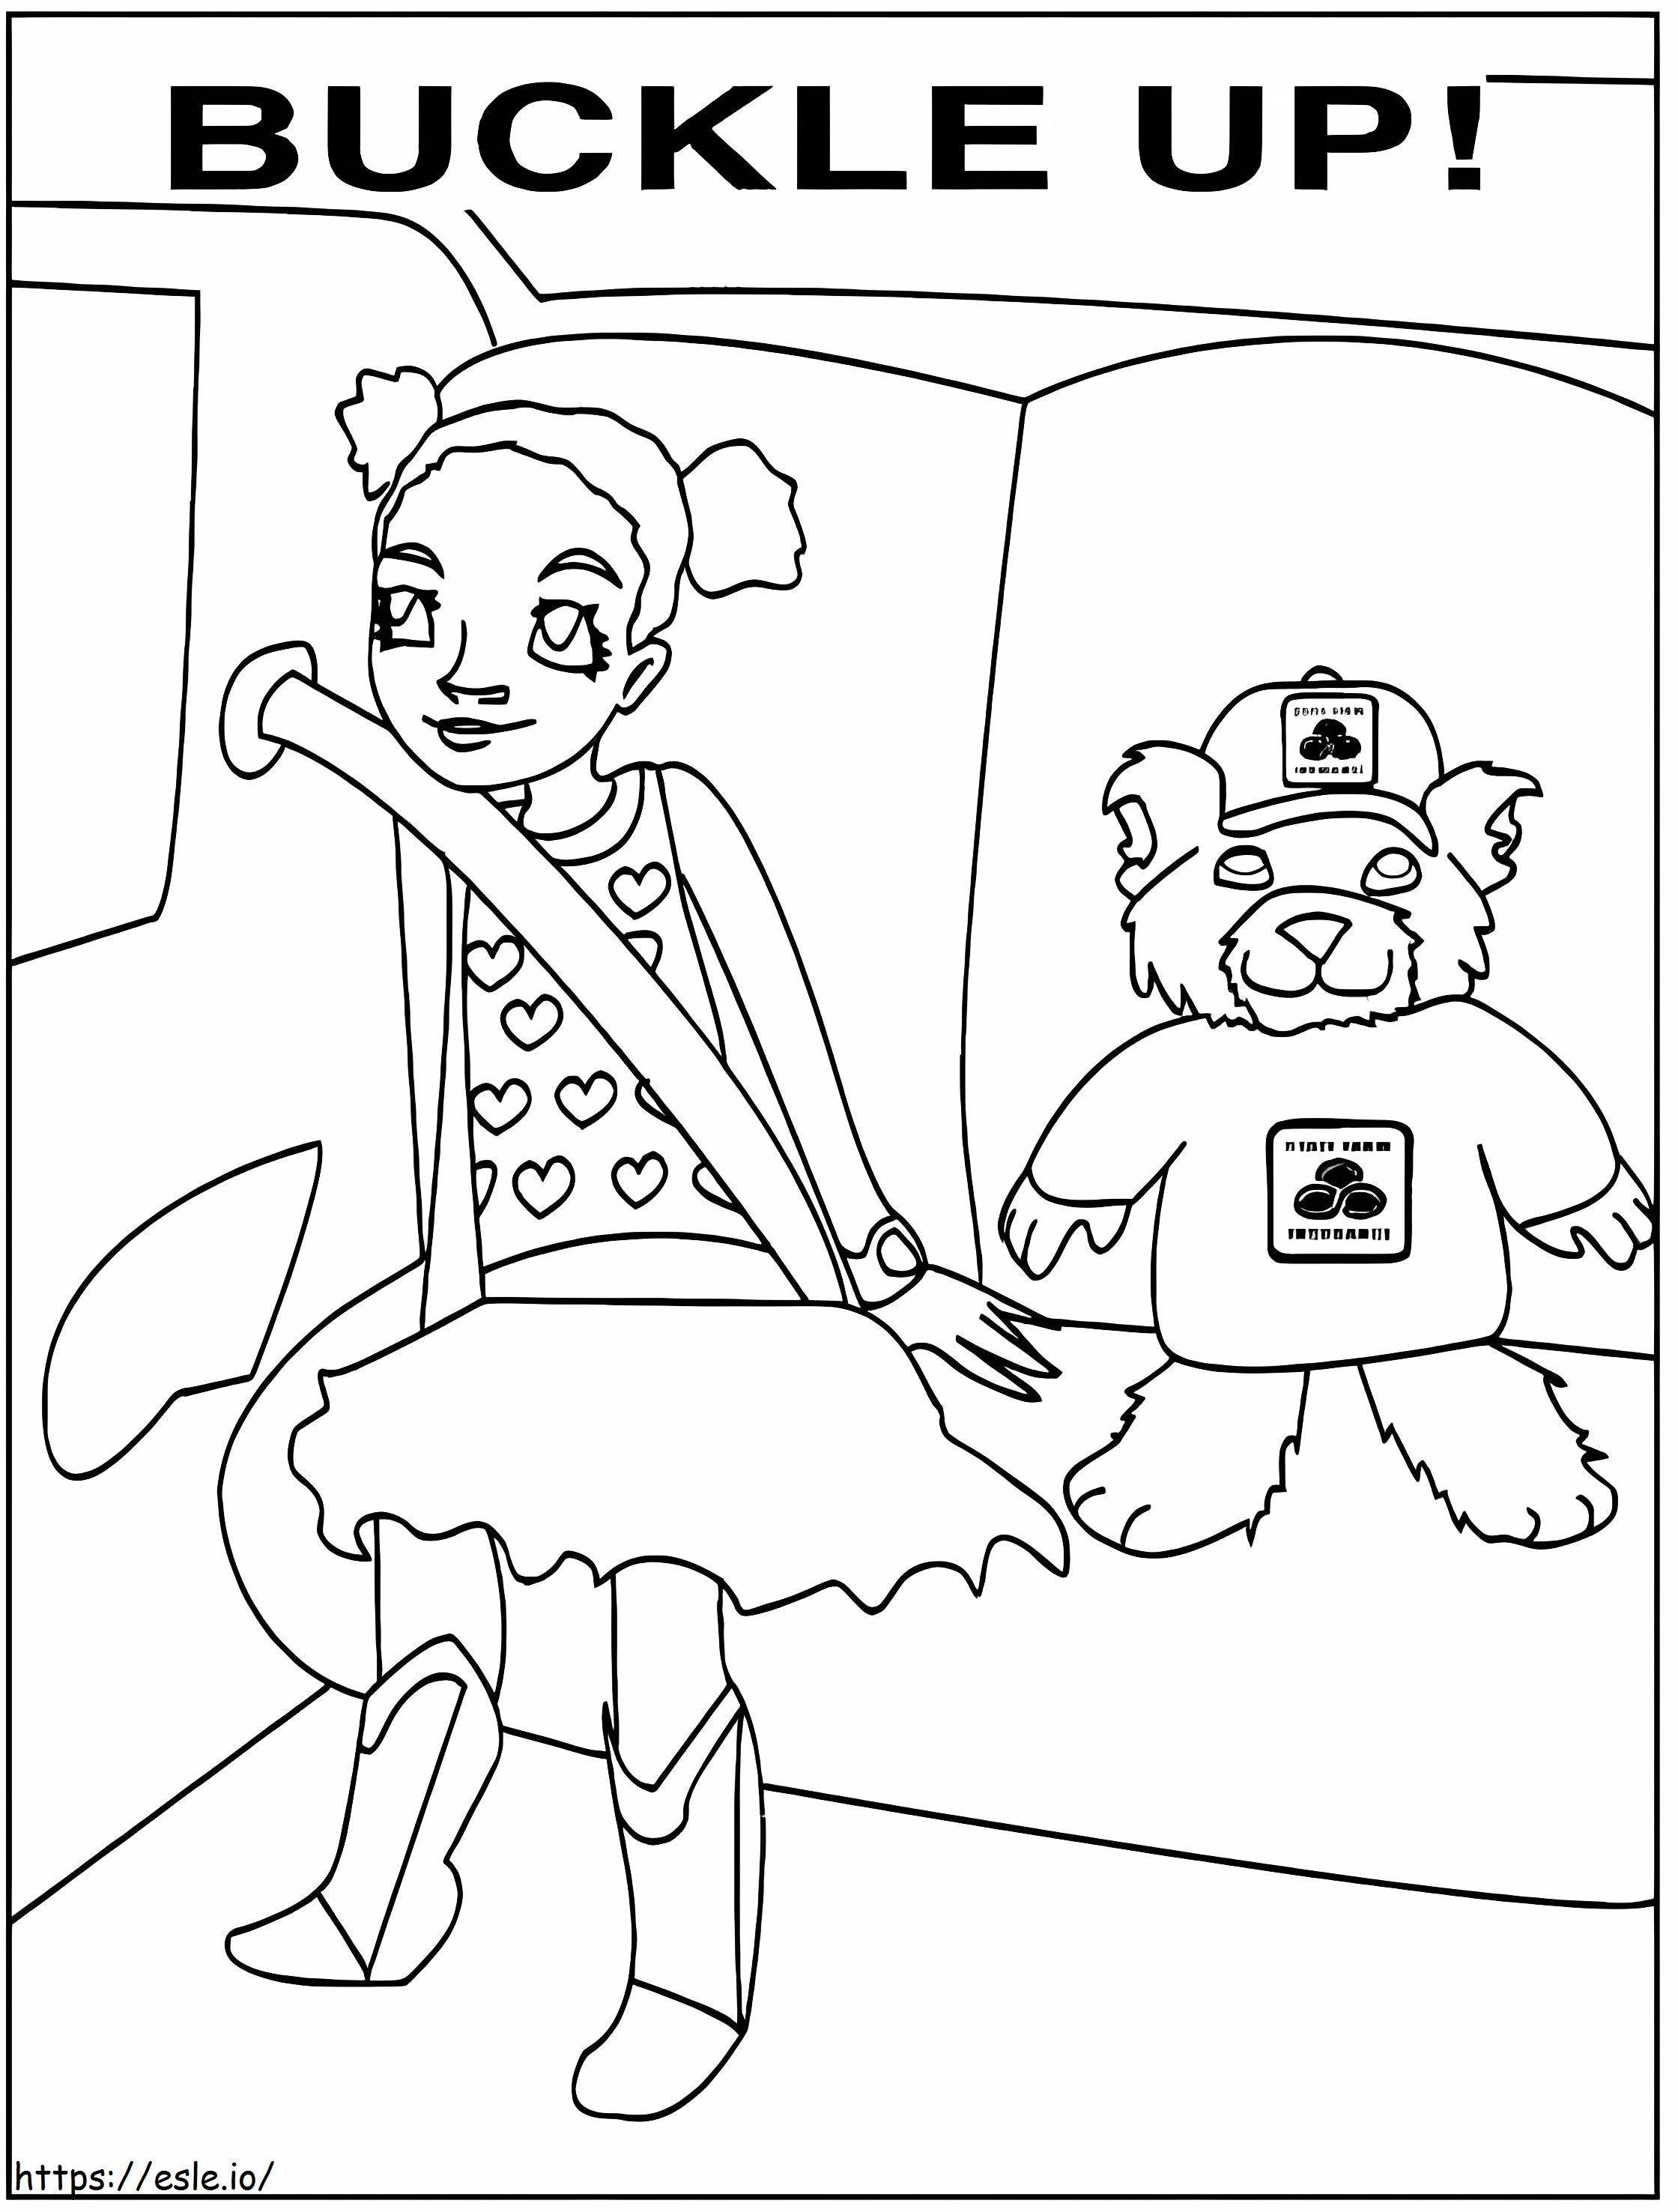 Buckle Up coloring page